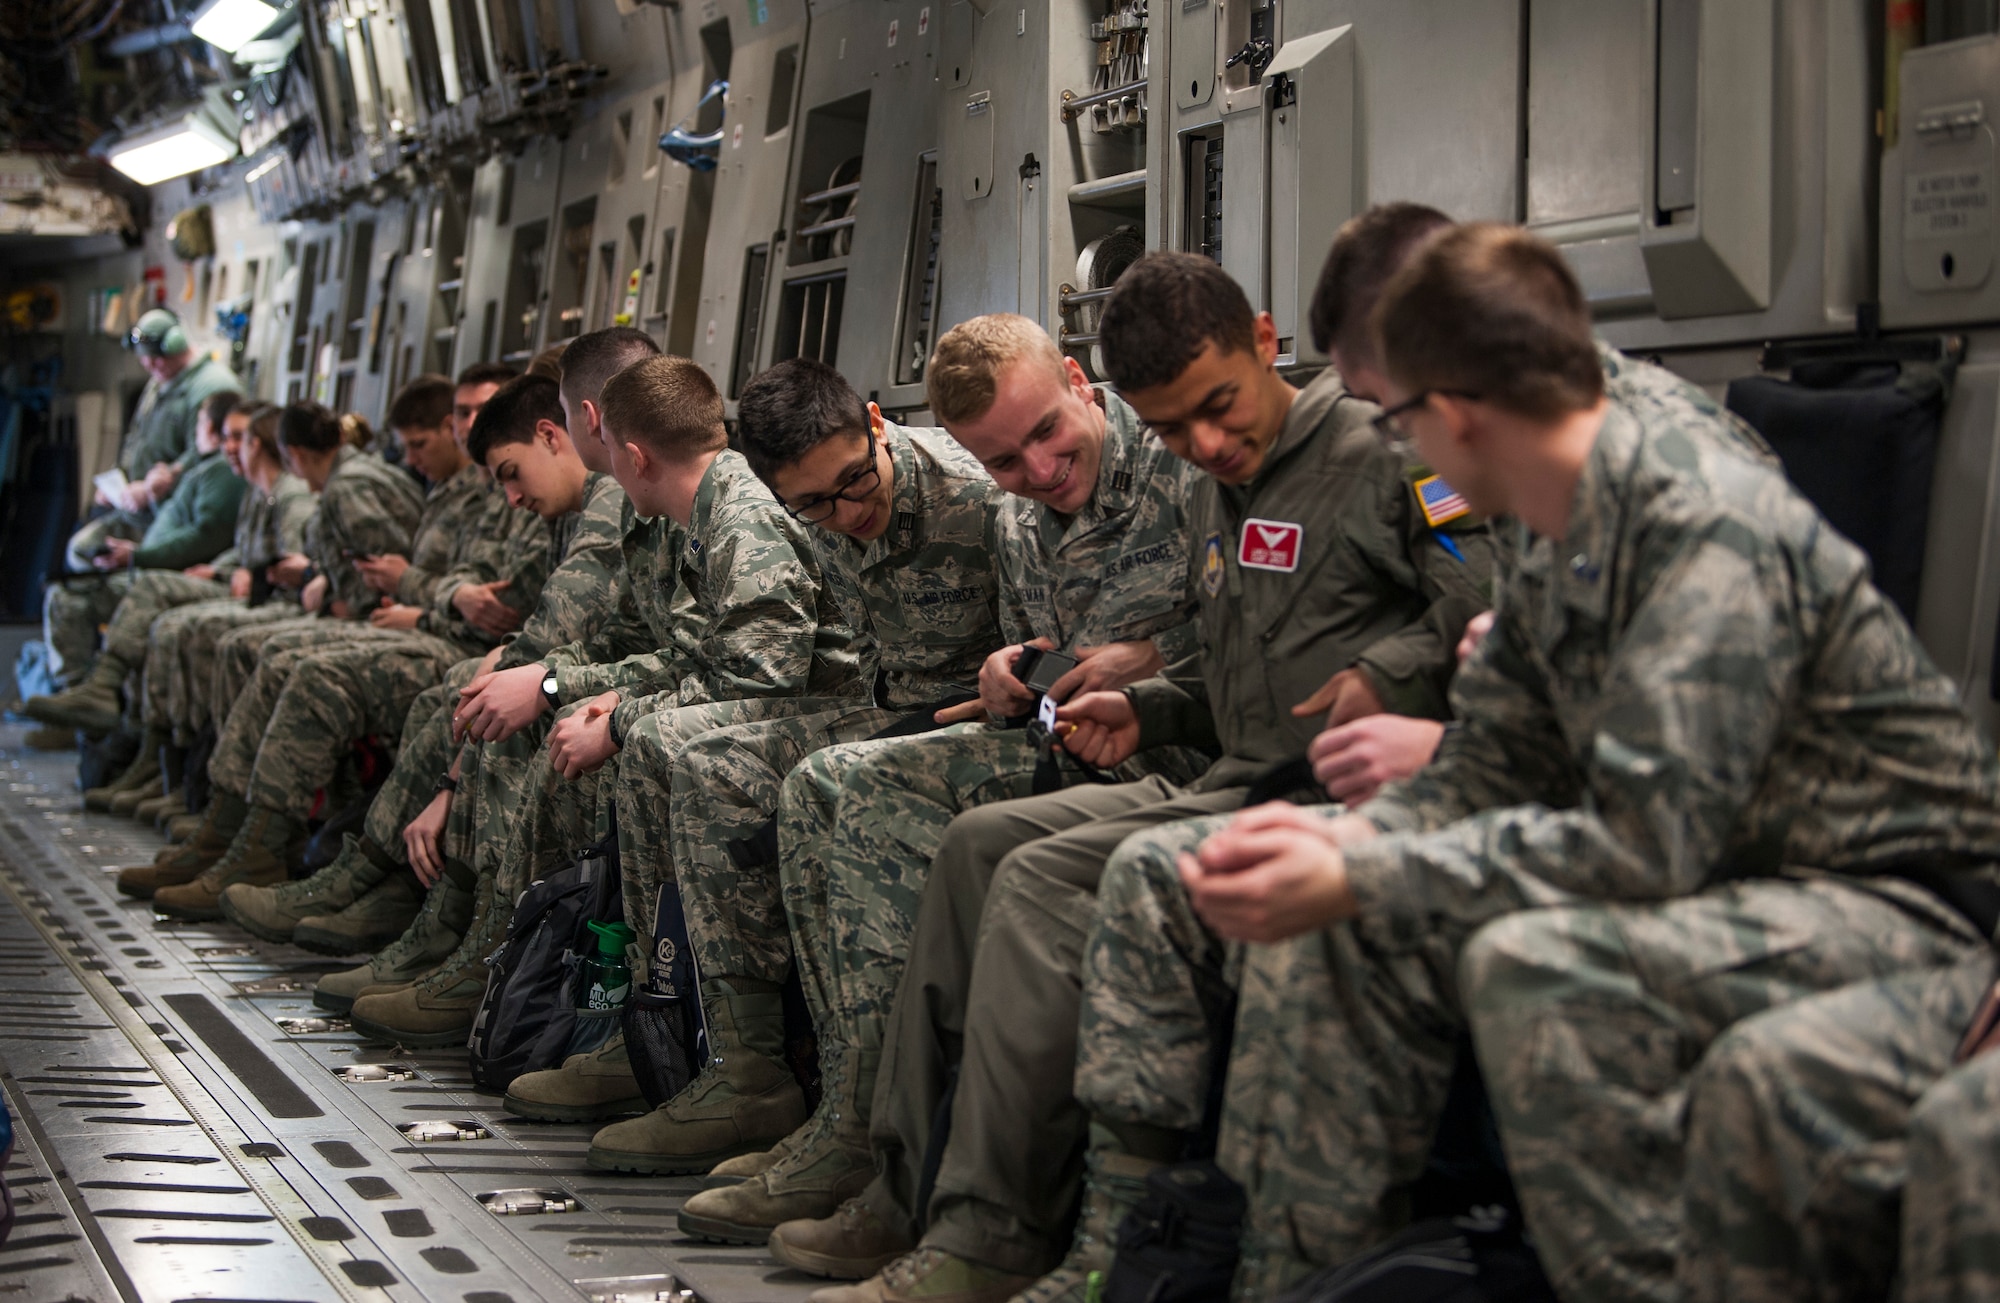 U.S. Air Force Reserve Officers Training Corps cadets assigned to Detachment 640 from Miami University, Ohio, fasten their seatbelts aboard a C-17 Globemaster III aircraft at Wright-Patterson AFB, Ohio, March 19, 2018.